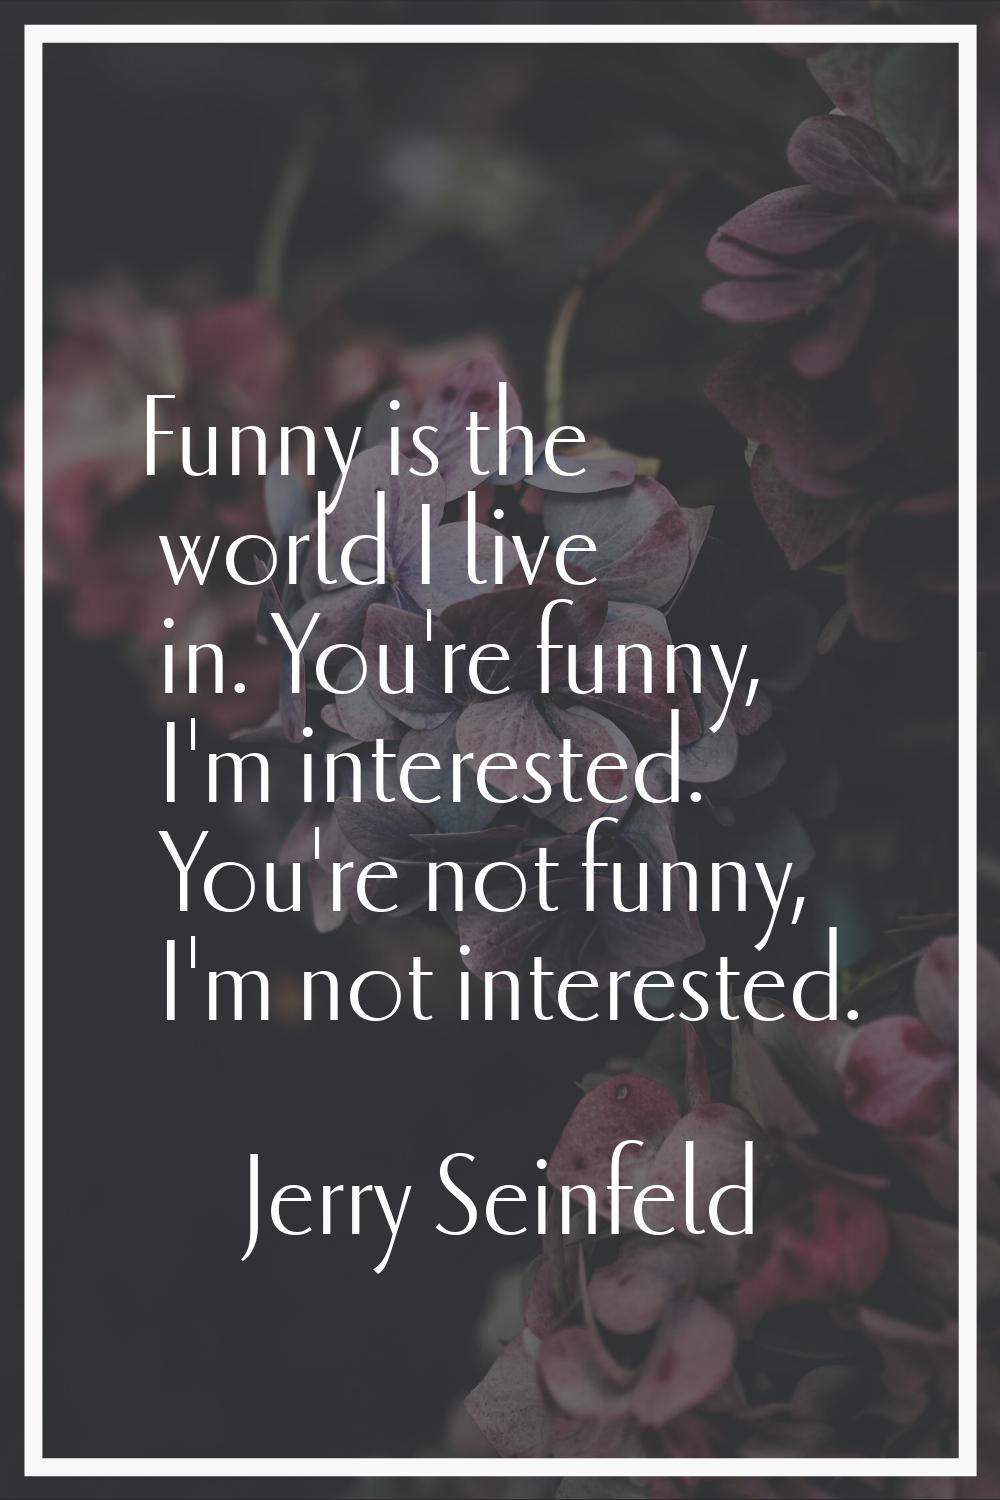 Funny is the world I live in. You're funny, I'm interested. You're not funny, I'm not interested.